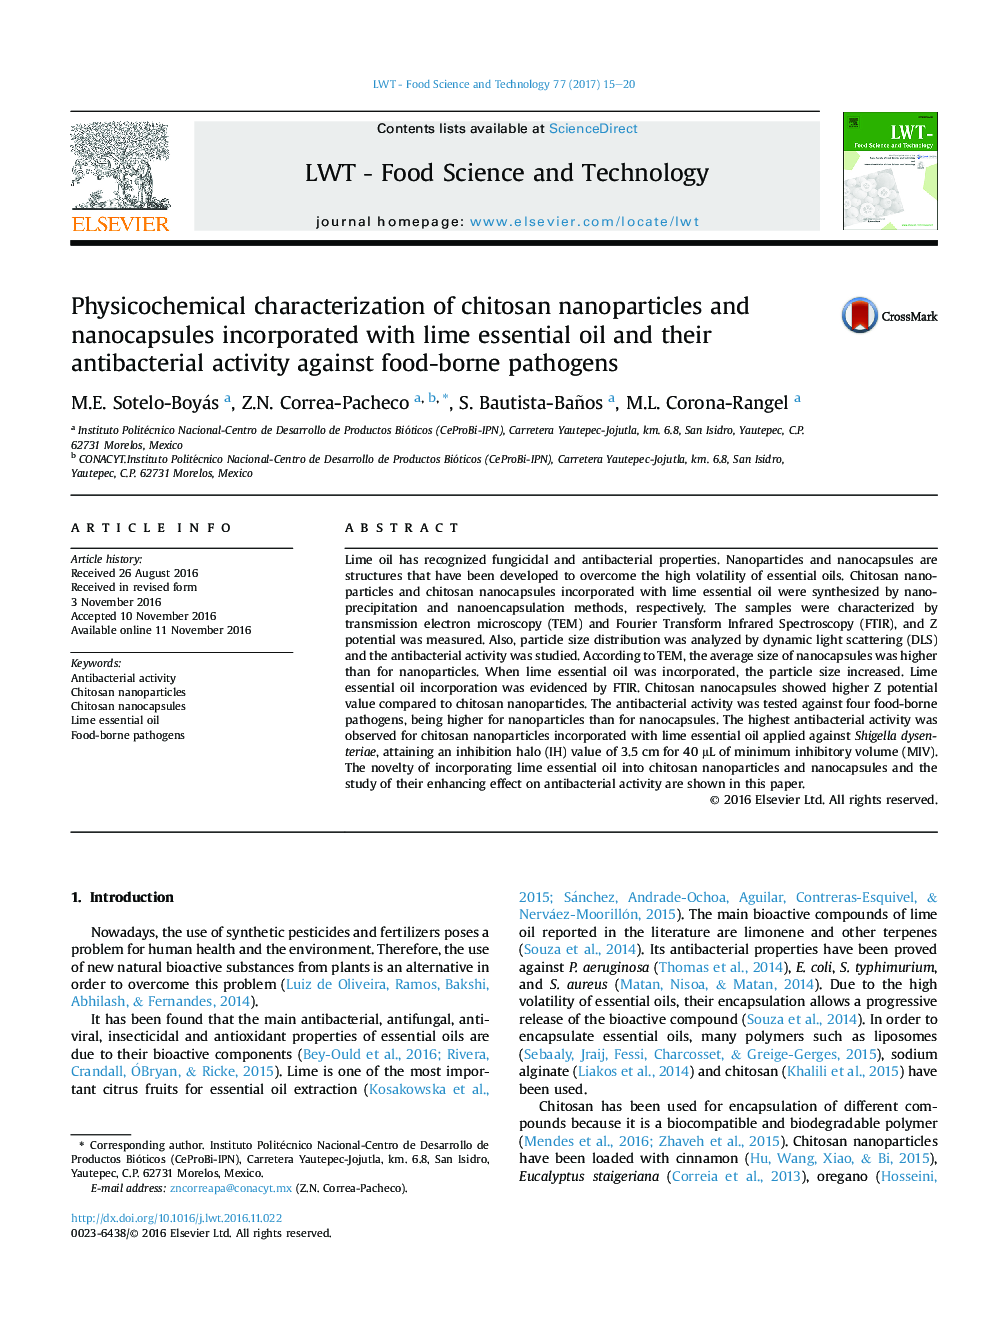 Physicochemical characterization of chitosan nanoparticles and nanocapsules incorporated with lime essential oil and their antibacterial activity against food-borne pathogens